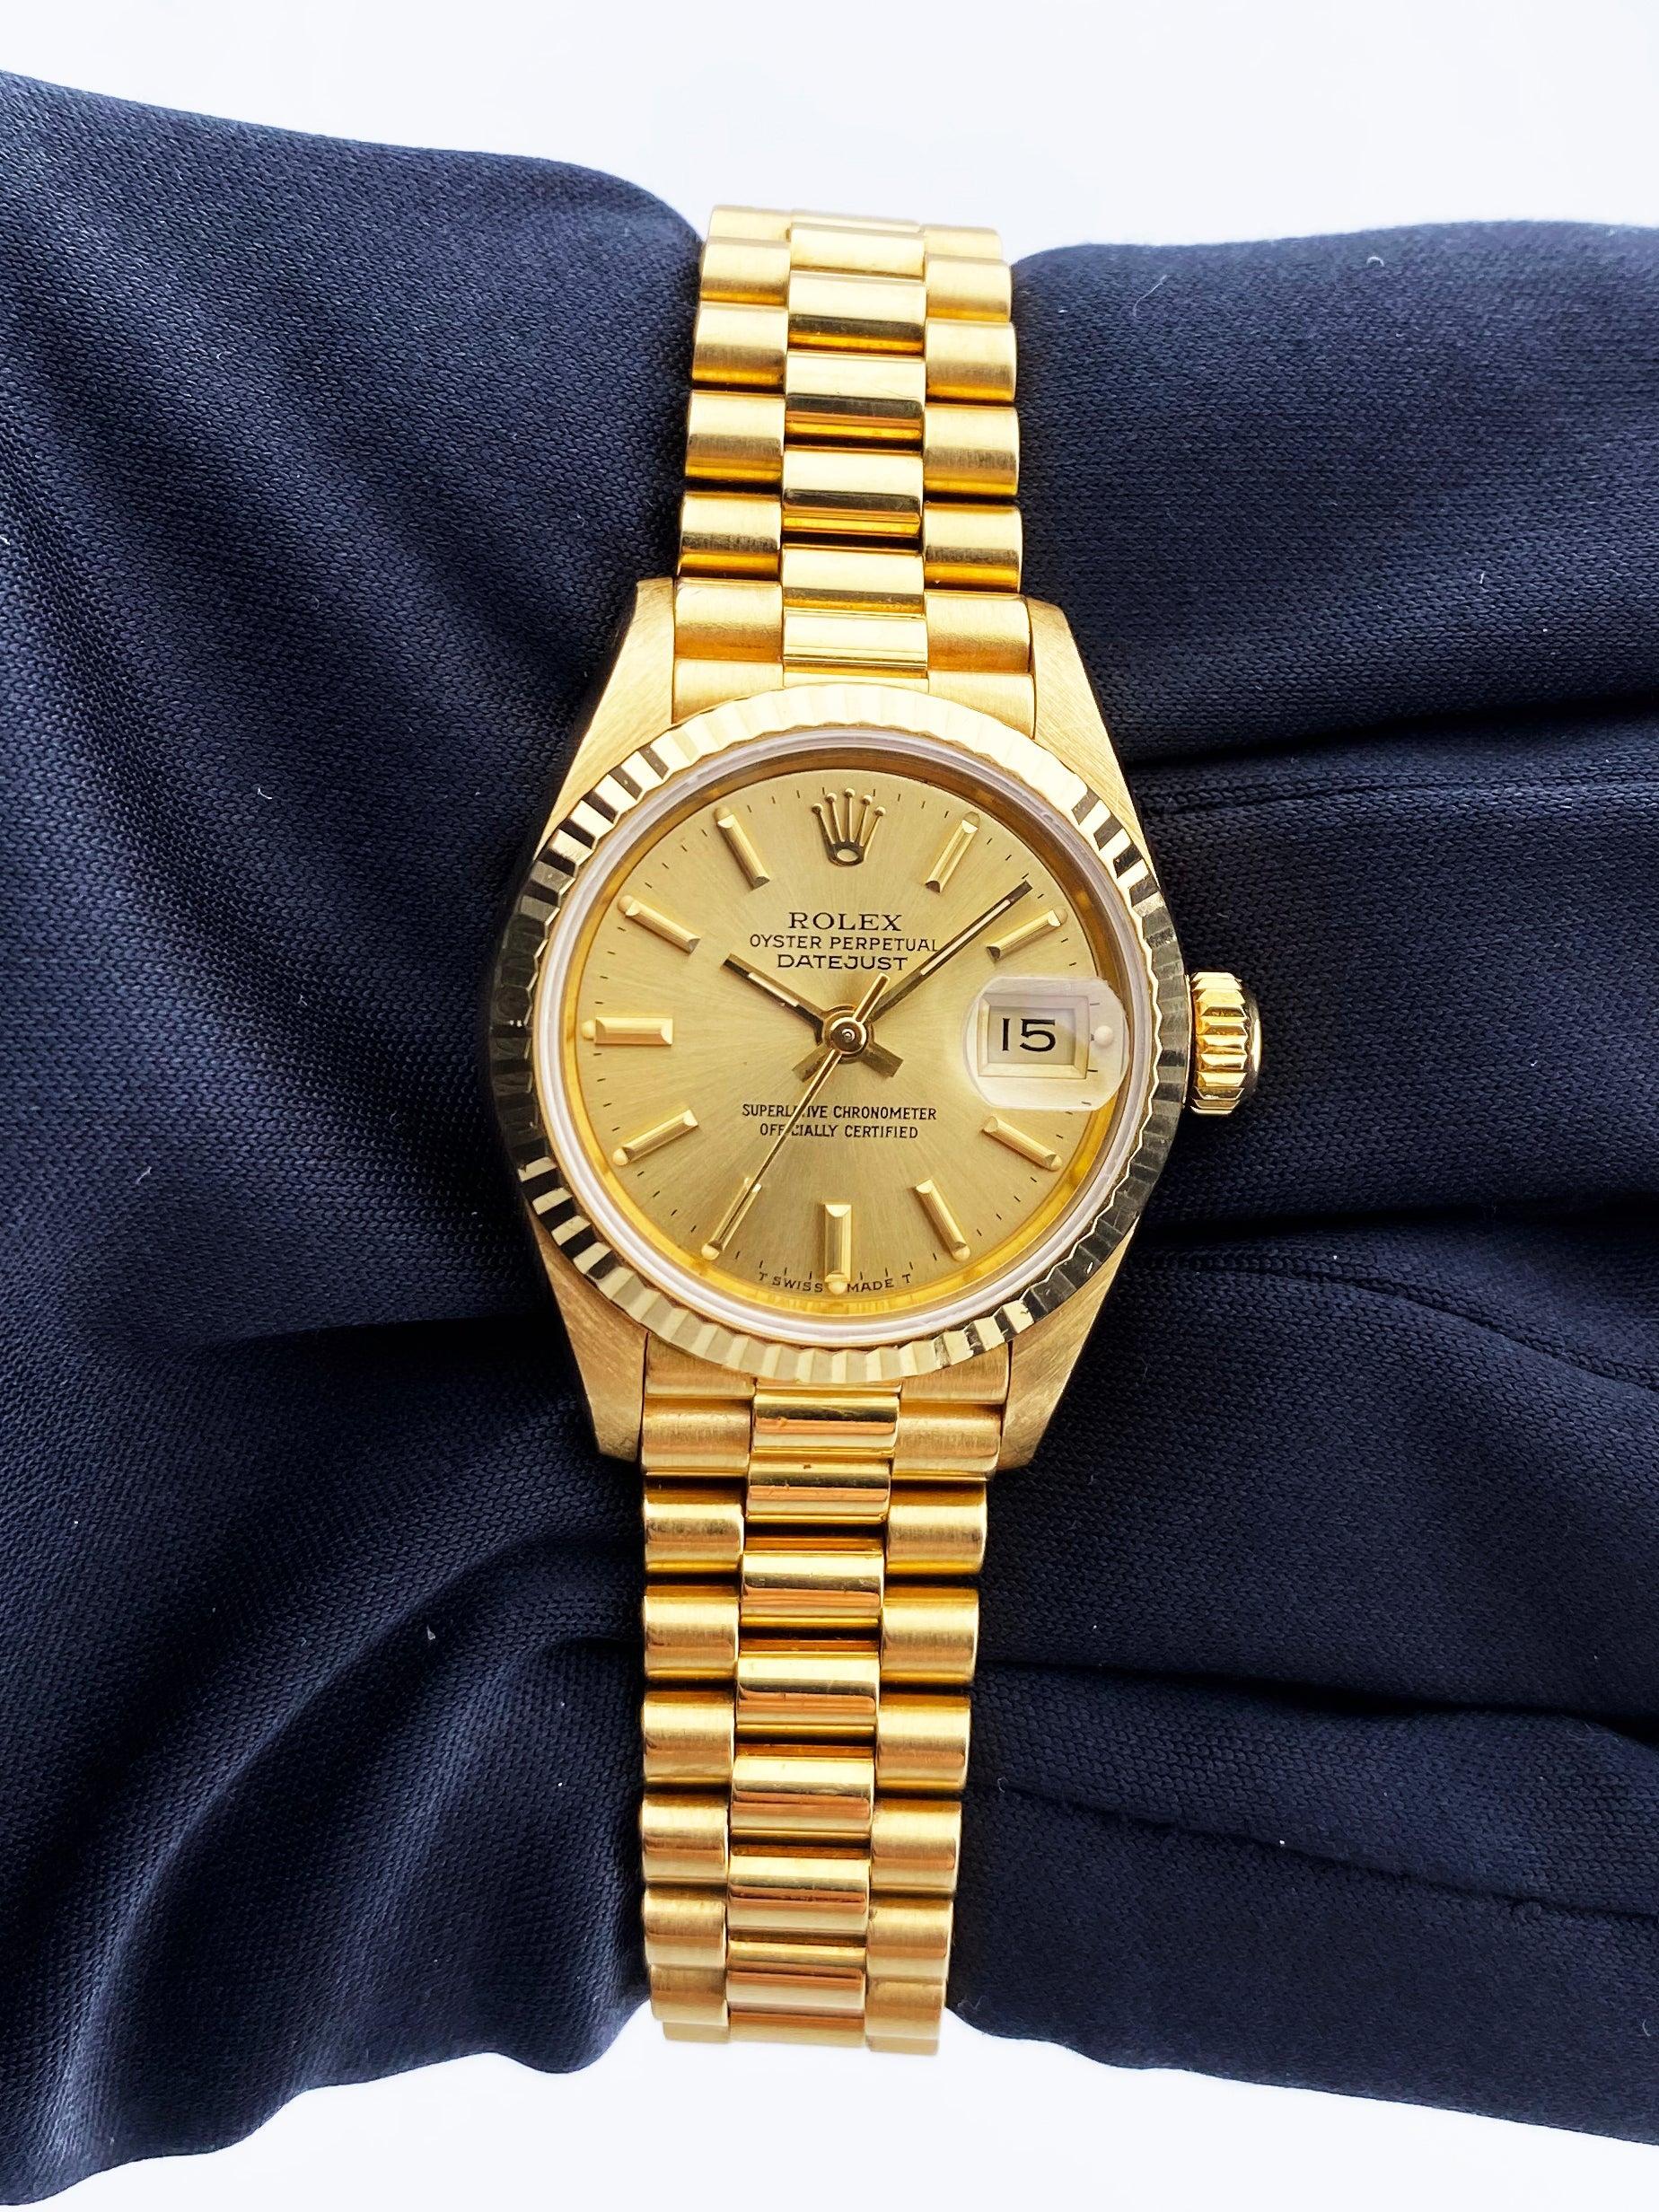 
Rolex Oyster Perpetual Datejust 69178 Ladies Watch. 26mm 18K yellow gold case with a fluted bezel. Champagne dial with gold hands and index hour markers. Minute markers on the outer dial. Date display at the 3 o'clock position. 18K yellow gold